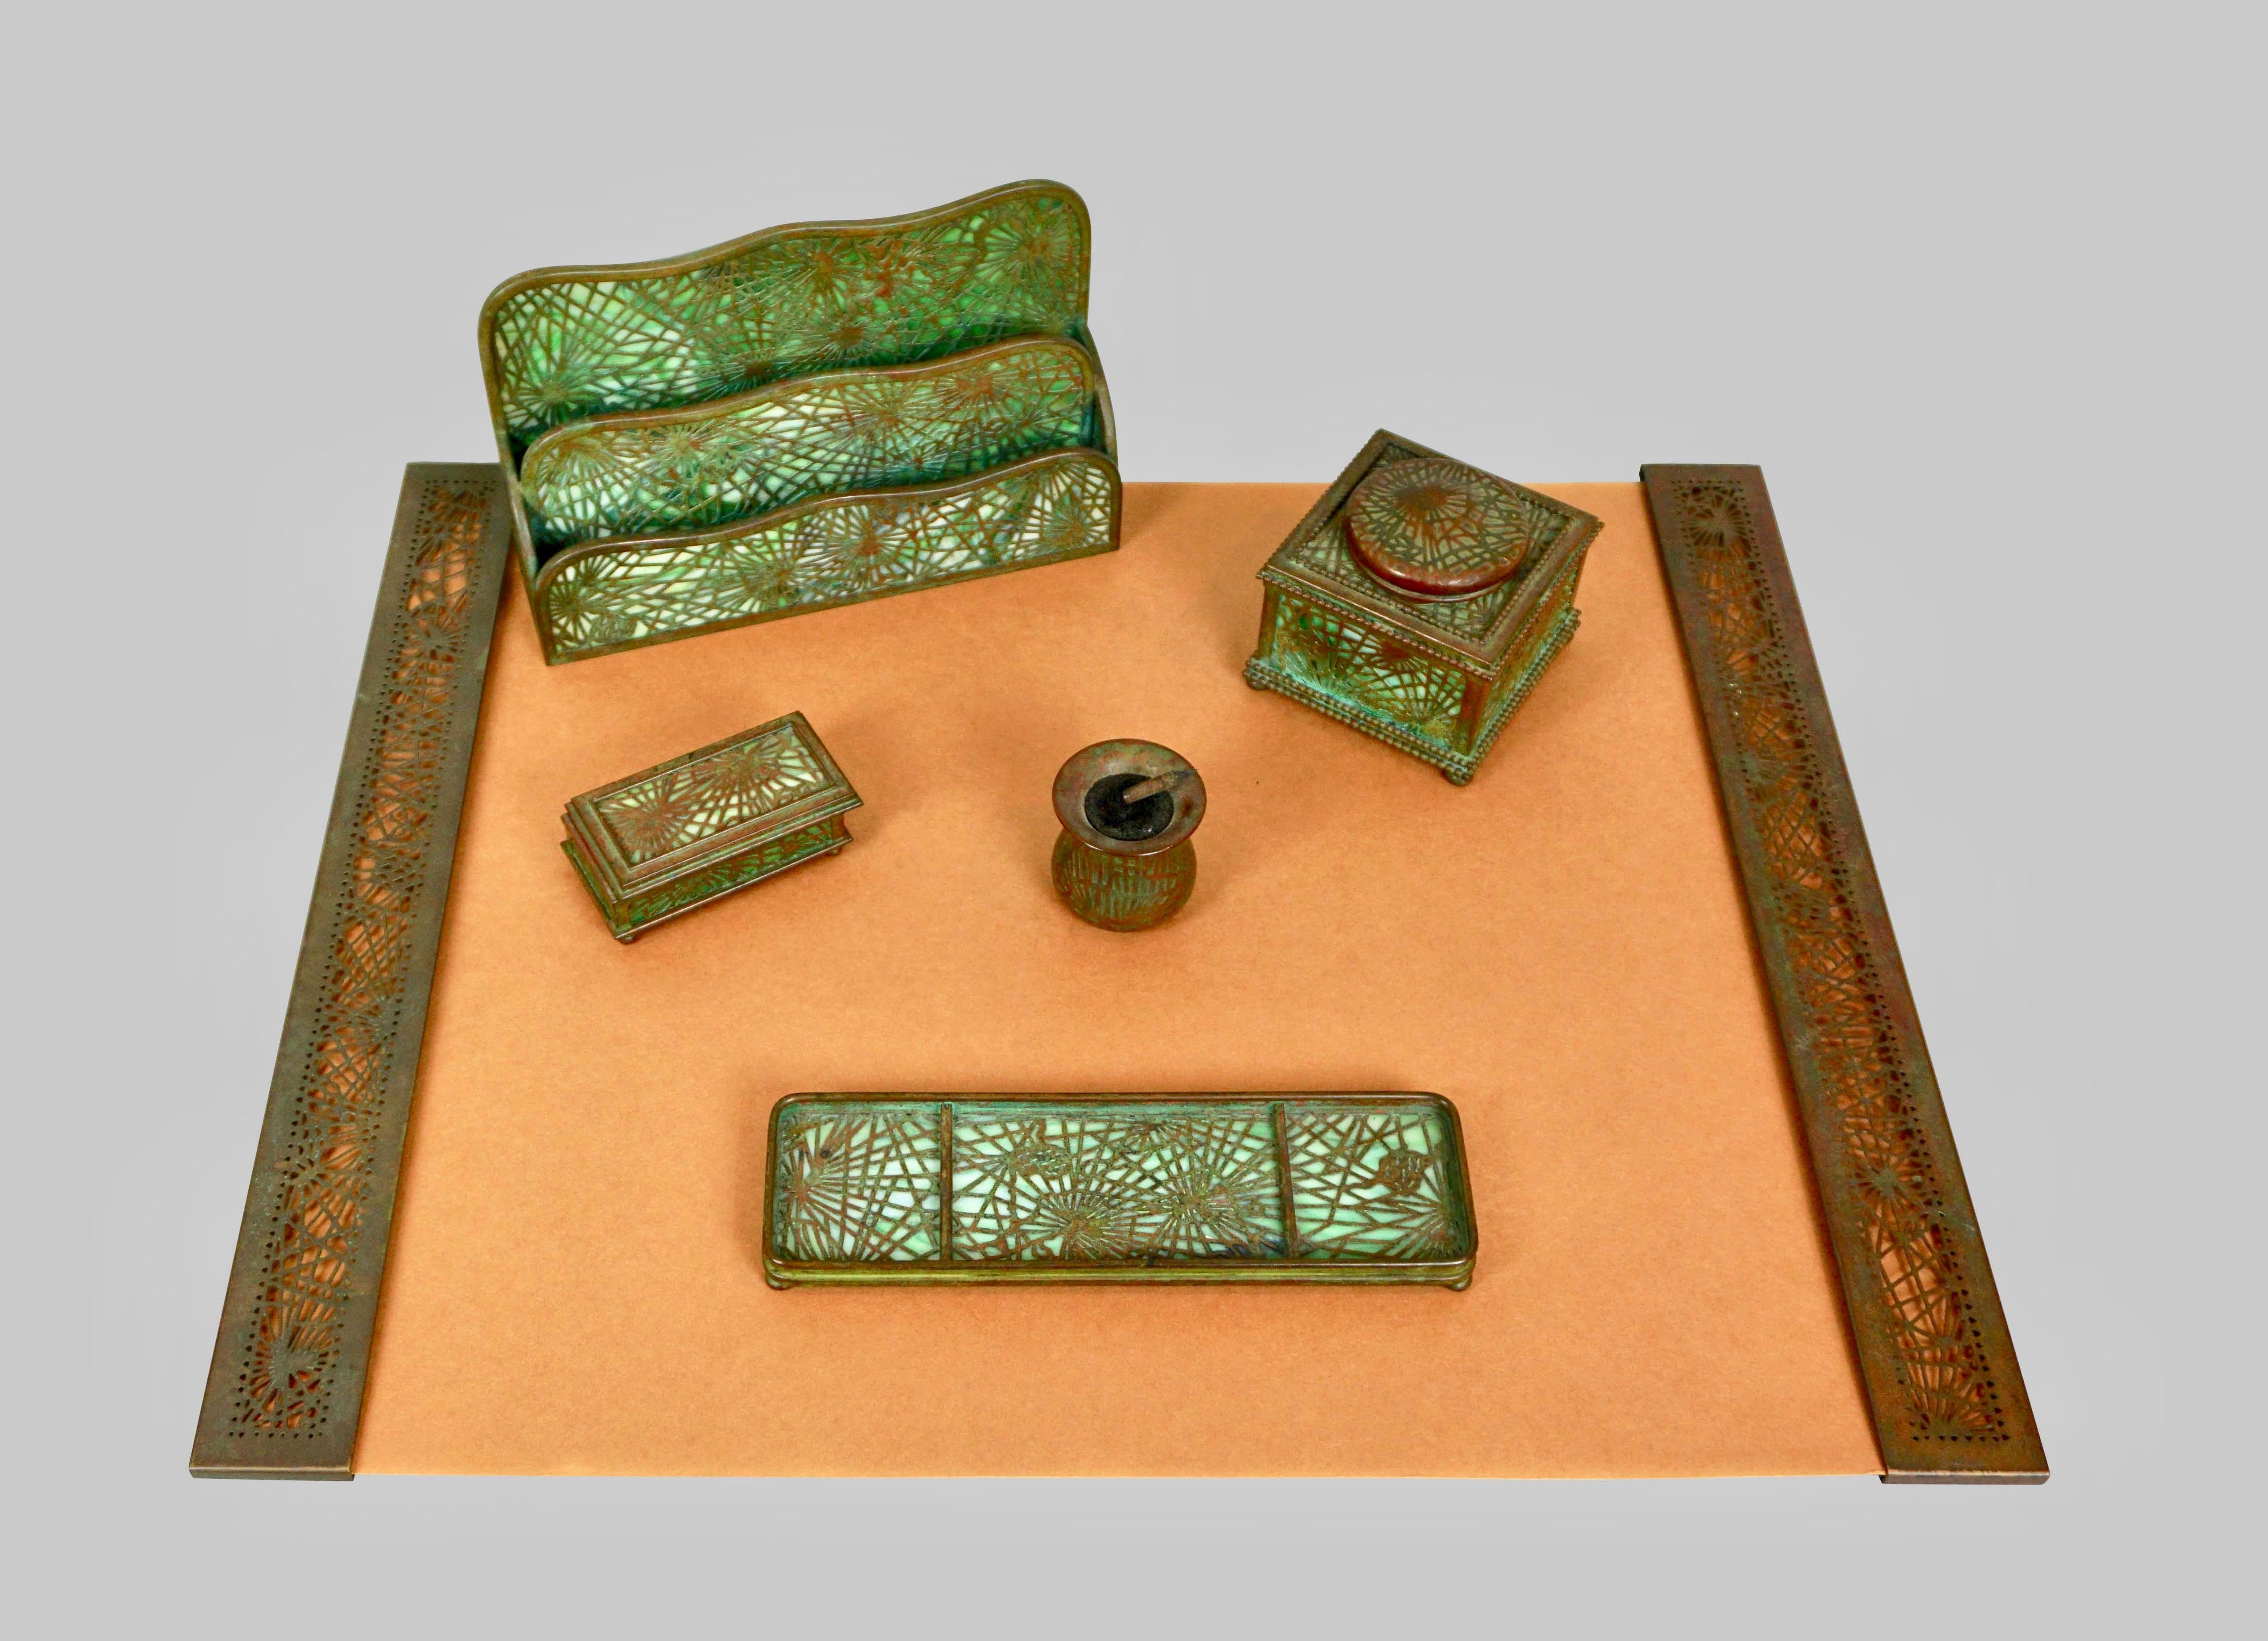 A 6 piece Tiffany Studios pine needle pattern fully signed bronze and glass desk set consisting of blotter ends, pen tray, inkwell, letter tray, nib cleaner and stamp box. The pine needle pattern was one the more popular of the Tiffany Studios'